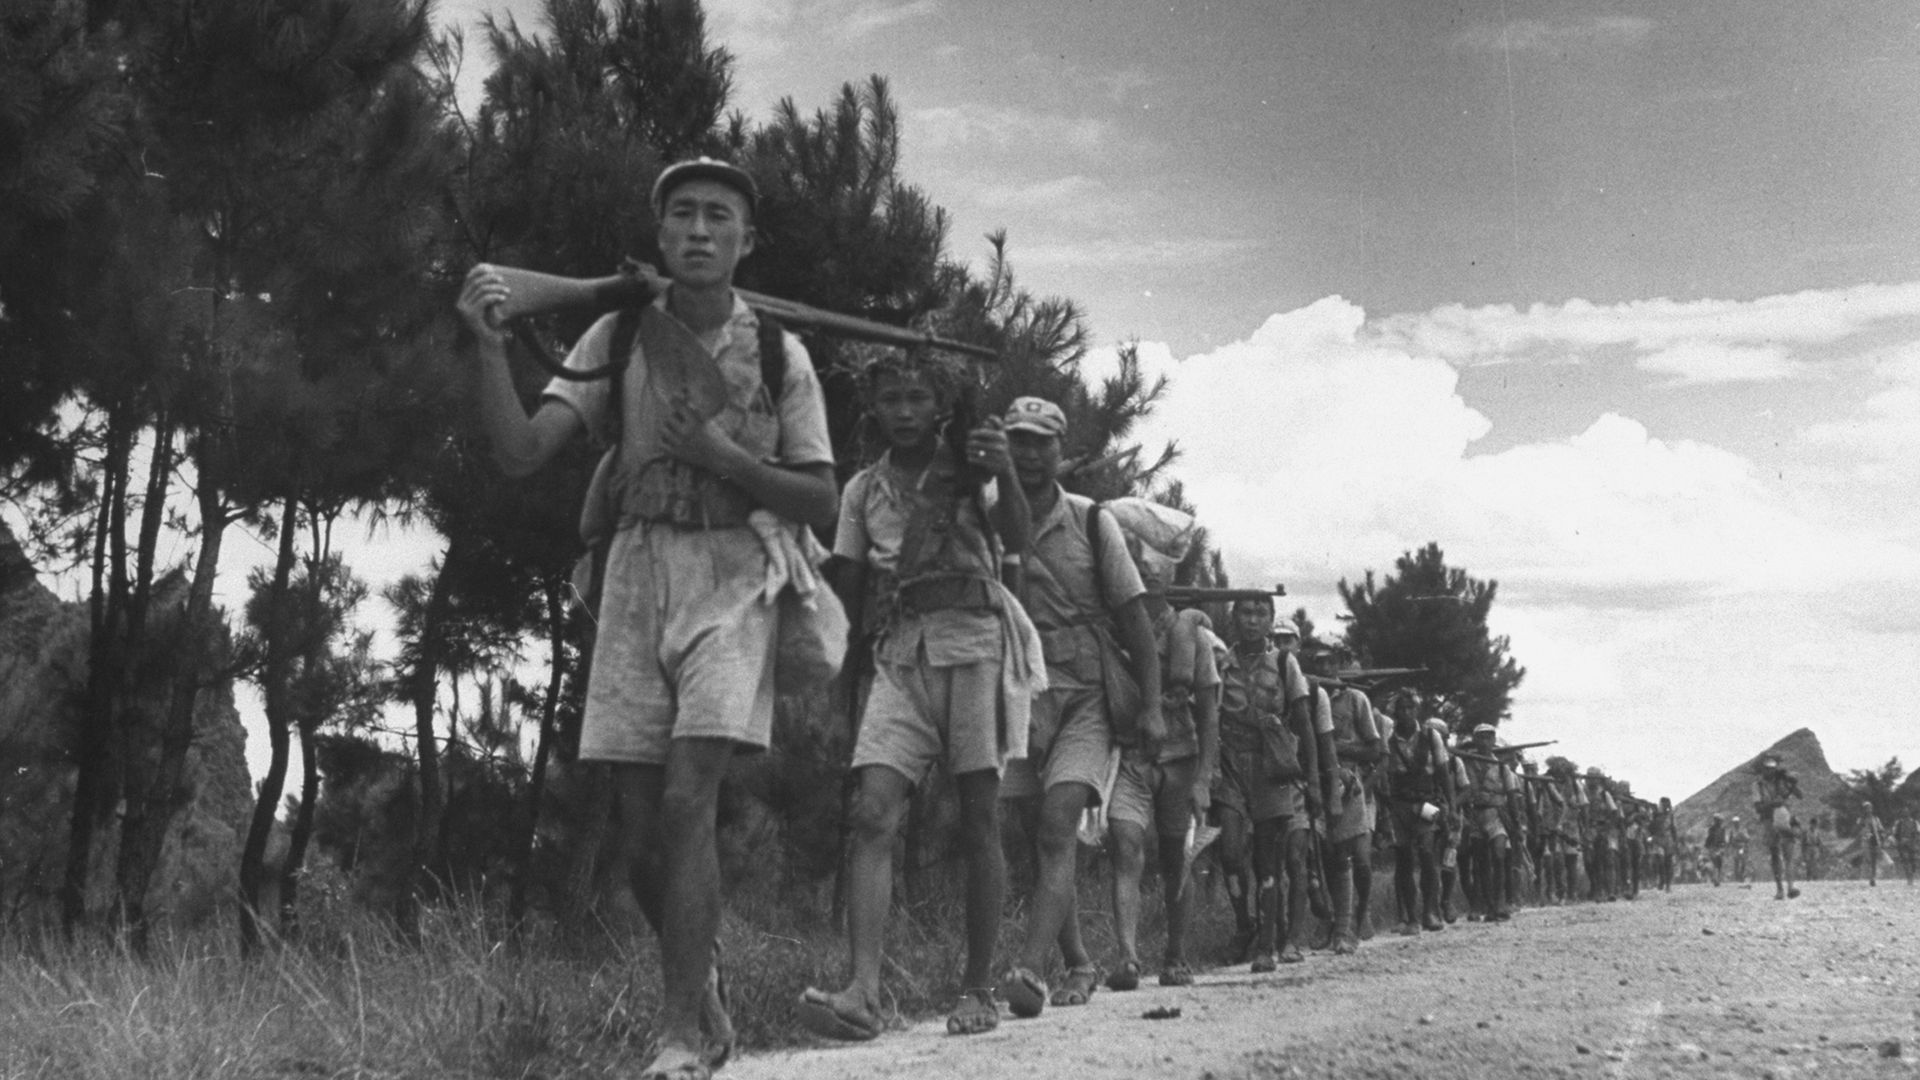 Chinese soldiers on the march during the Second World War - Credit: The LIFE Picture Collection